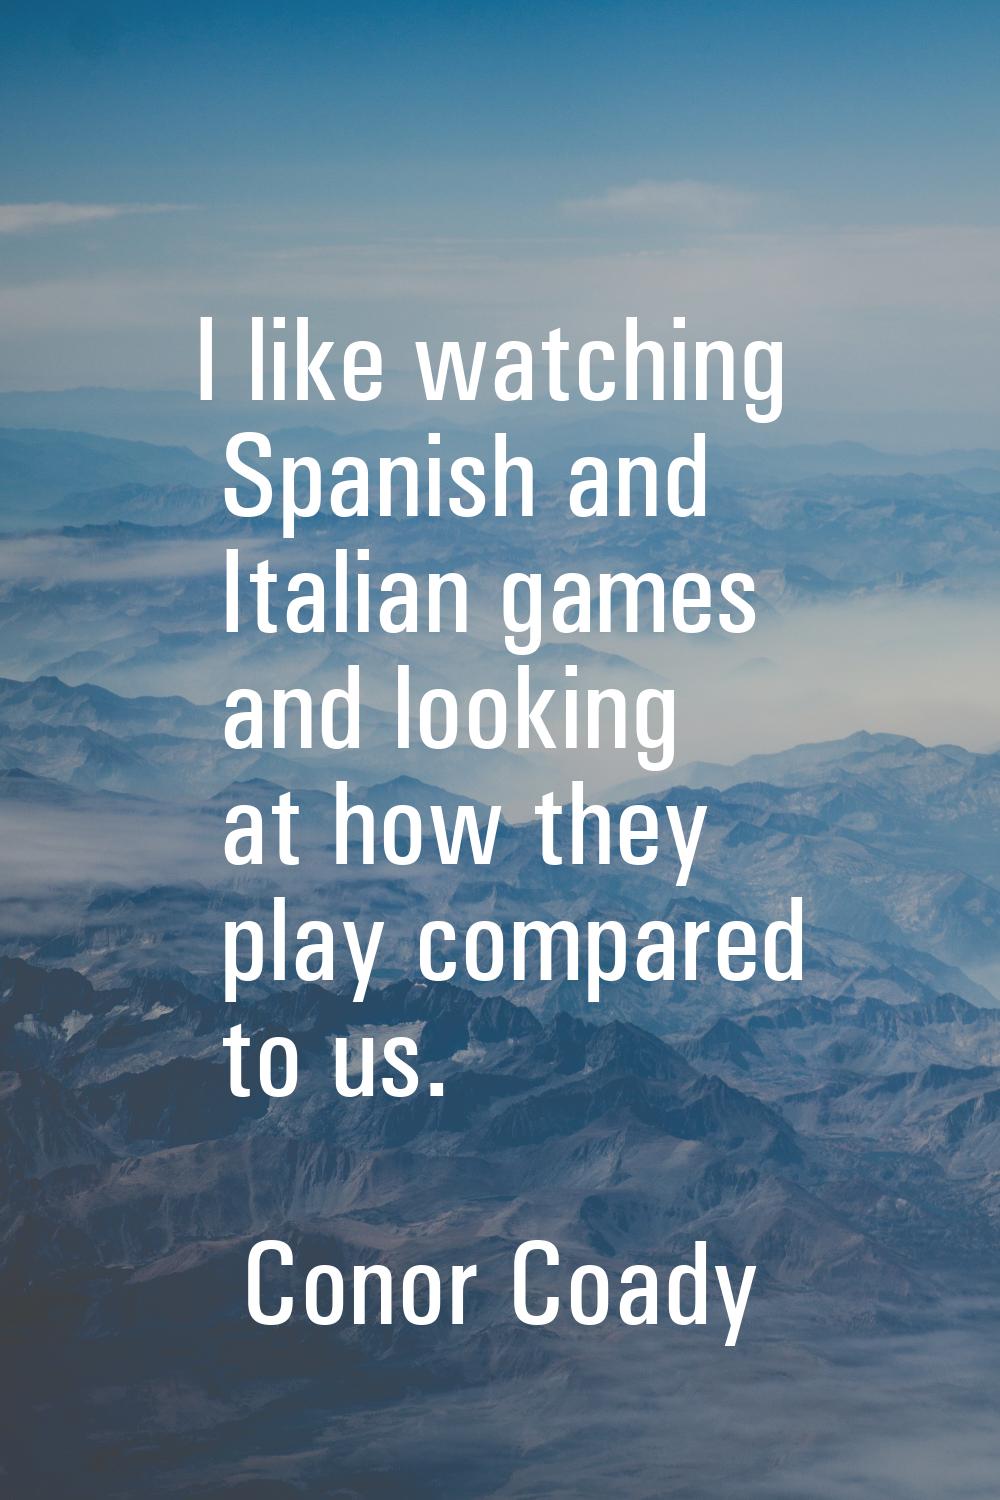 I like watching Spanish and Italian games and looking at how they play compared to us.